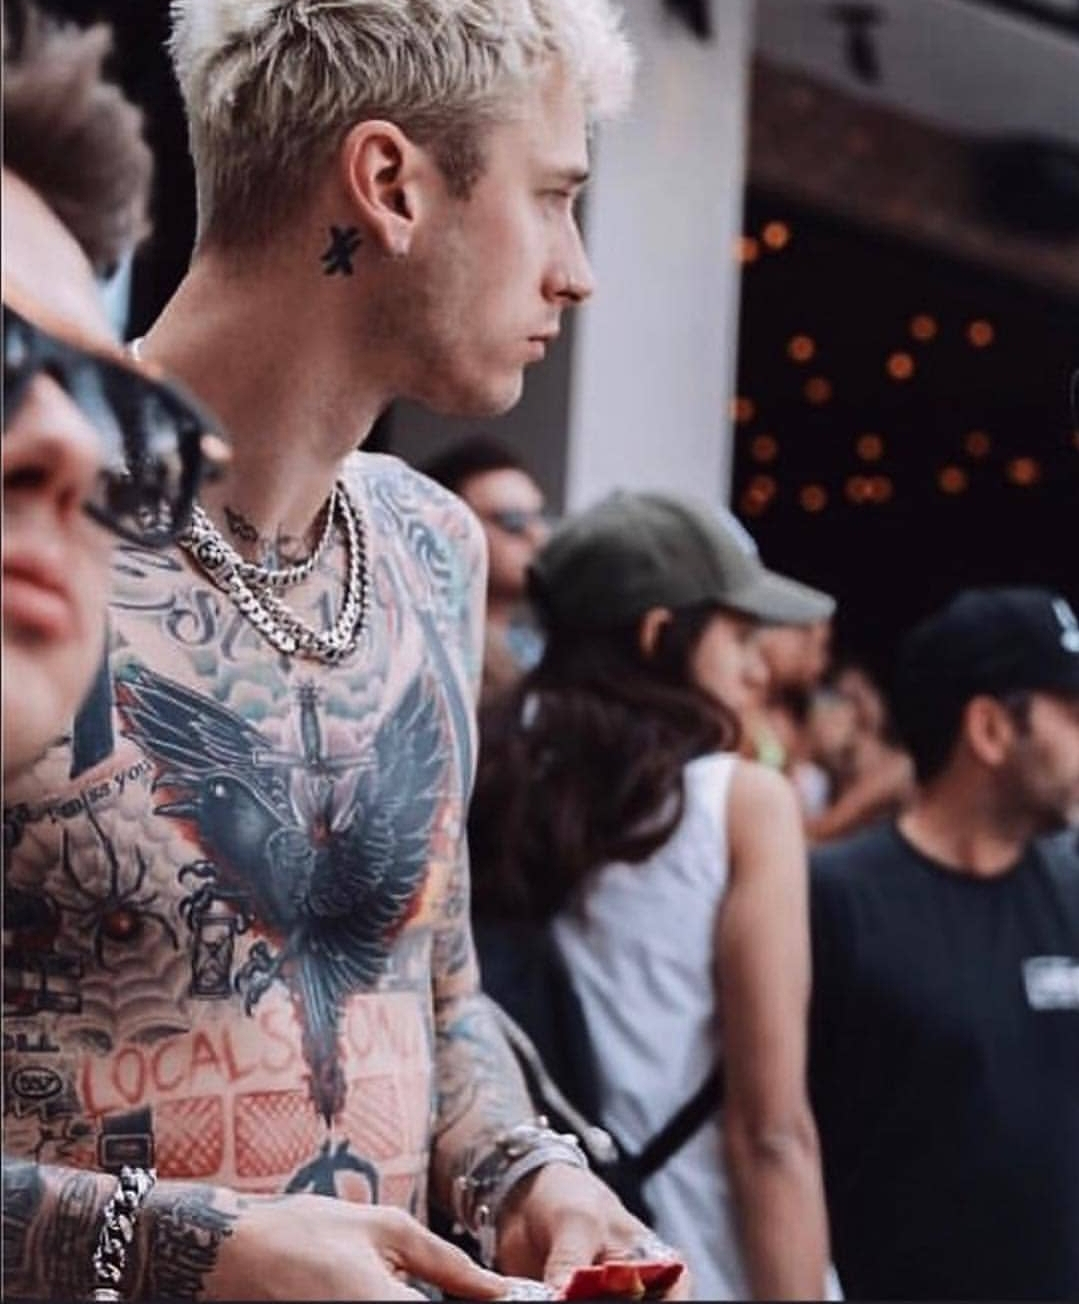 The New Tattoo Looks Dope As Fuck Machinegunkelly intended for measurements 1079 X 1304